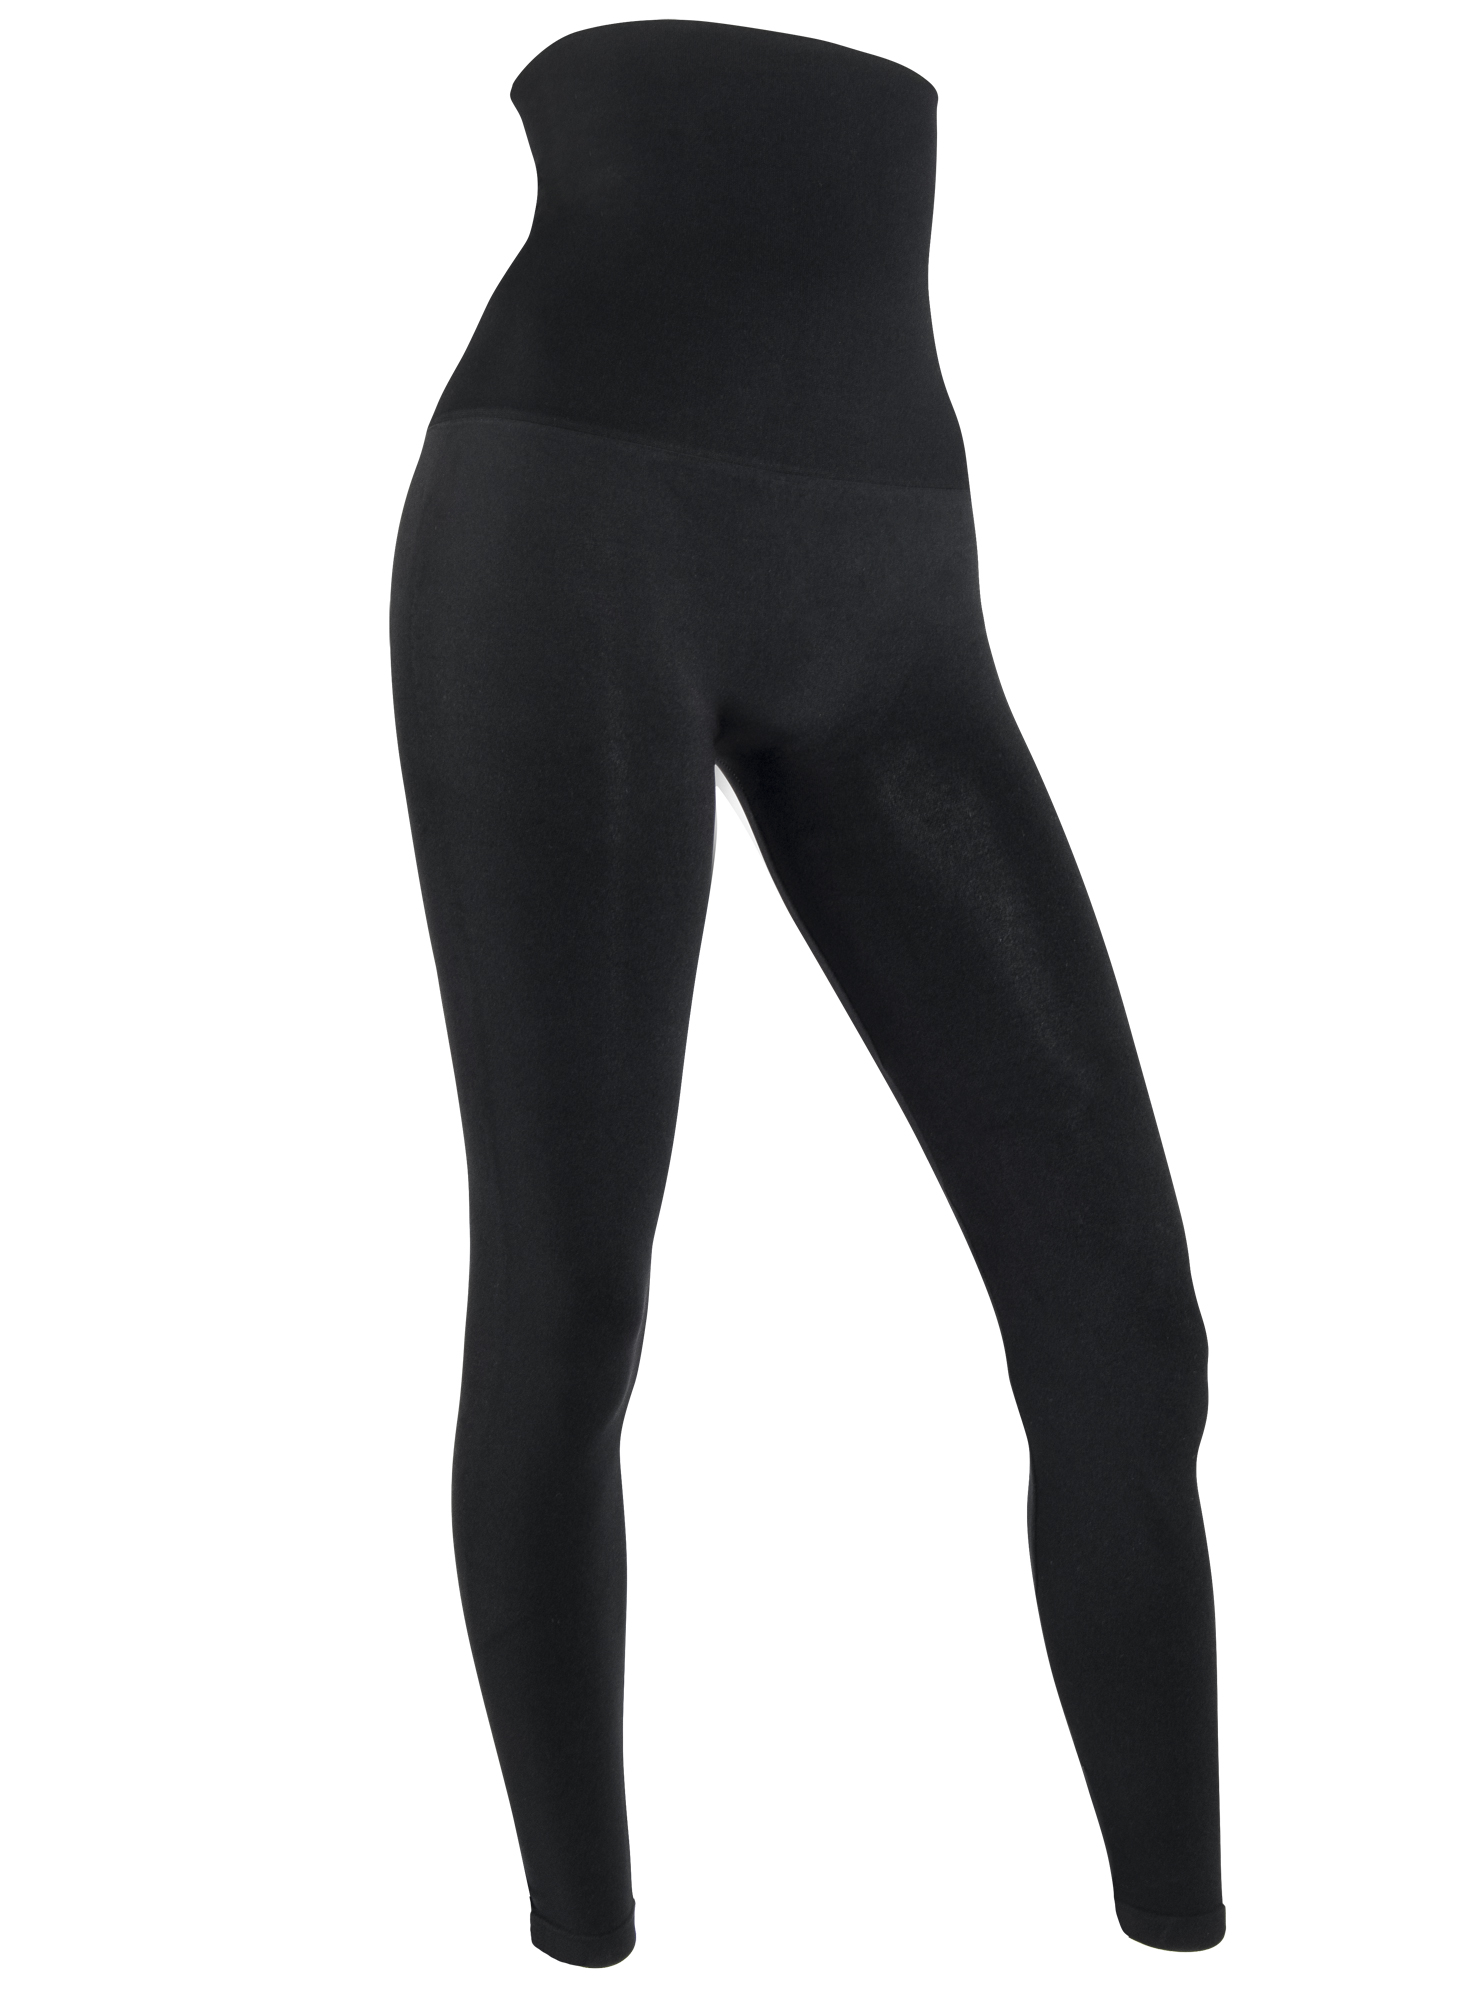 Buy Relaxsan Sport 8050 - Compression Sport Leggings to shape your body -  Aviano Store